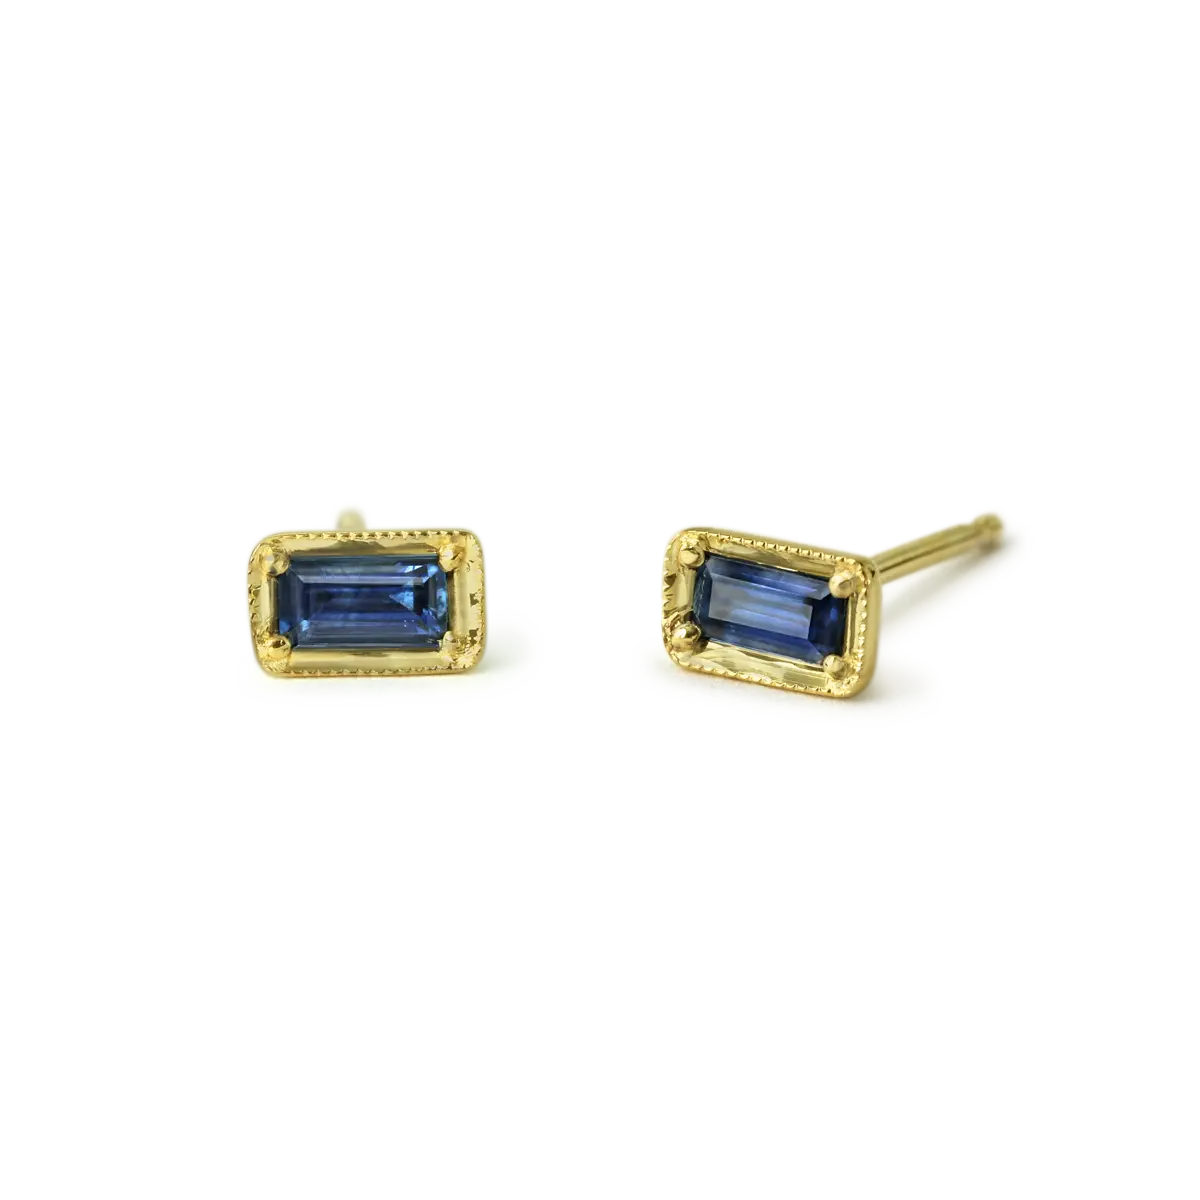 Great Blue Sapphire Stud Earrings in 14k Yellow Gold. The sapphires are .27 cttw baguette blue sapphire  Sold as a pair  Dimensions: 3.5x6.3mm  If an item is out of stock, please allow 3-6 weeks for delivery.  Designed by ILA